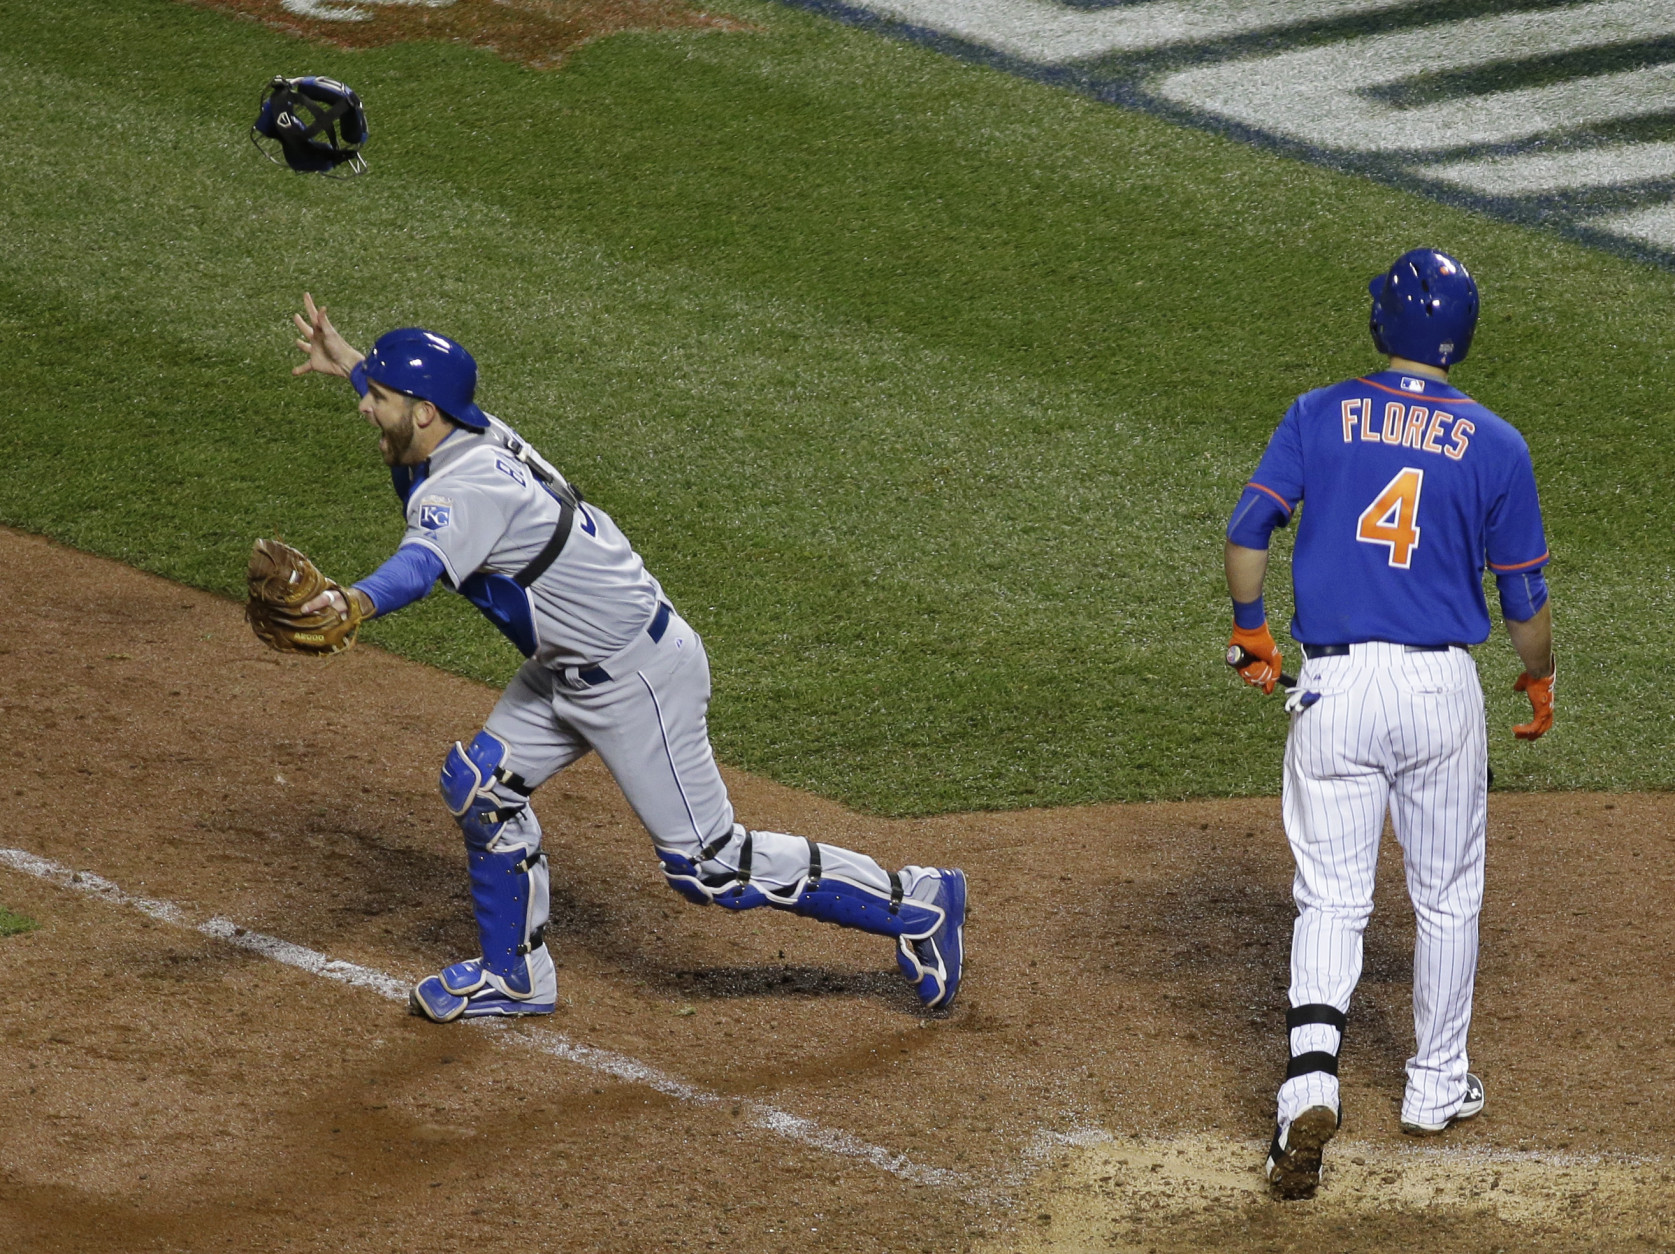 Kansas City Royals catcher Drew Butera celebrates after New York Mets' Wilmer Flores (4) struck out to end Game 5 of the Major League Baseball World Series against the New York Mets Monday, Nov. 2, 2015, in New York. The Royals won 7-2 to win the series. (AP Photo/Matt Slocum)